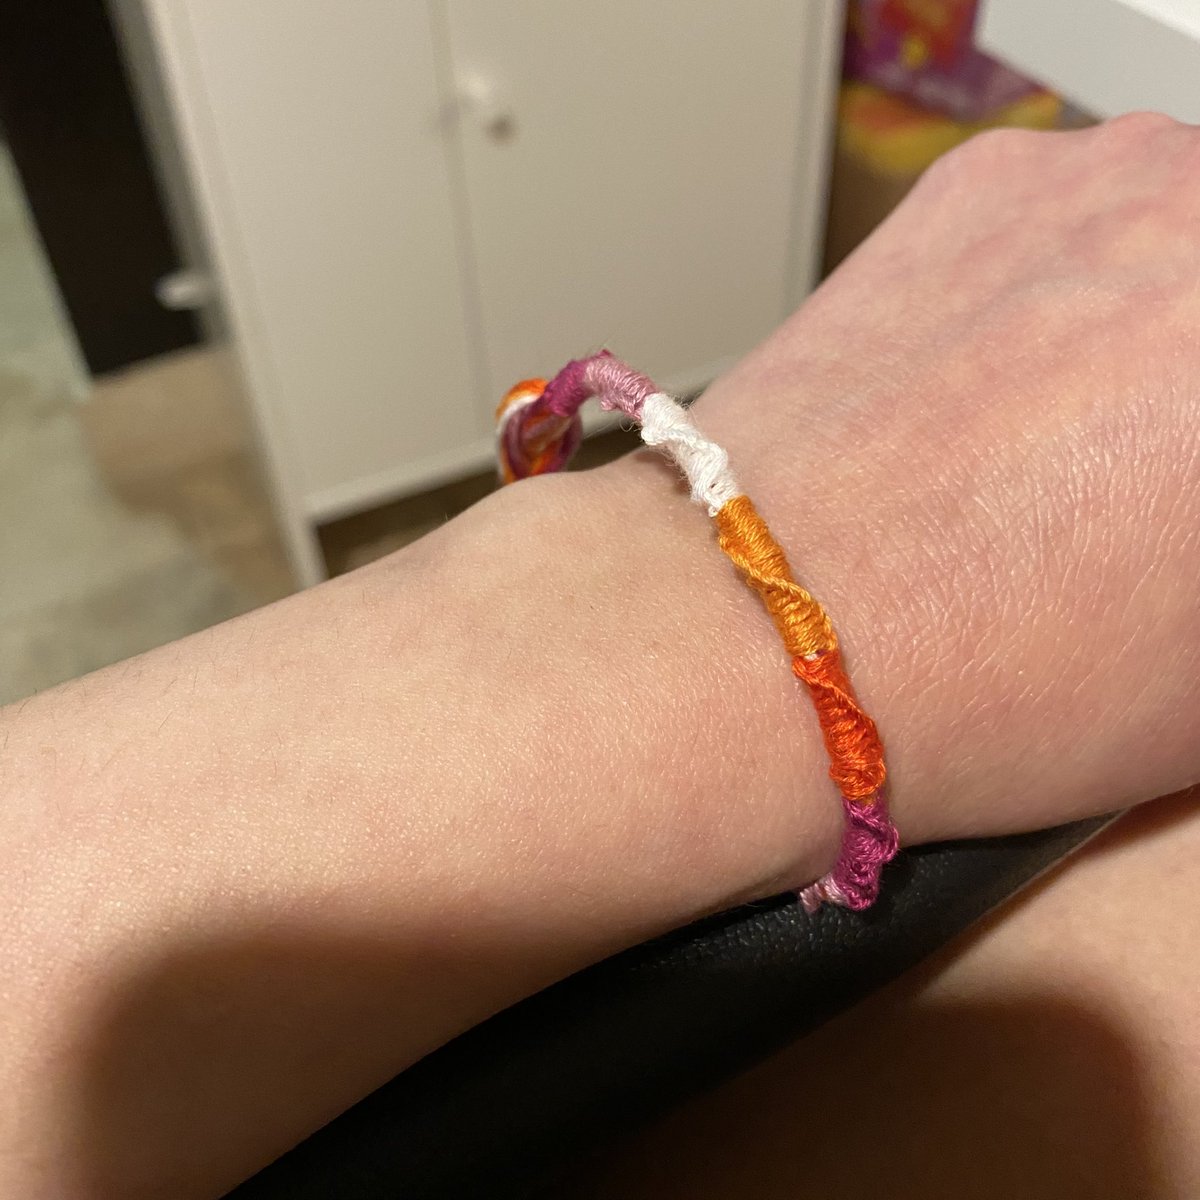 My first step into jewelry making was to weave a lesbian pride bracelet for myself. It took years for me to fully accept that I’m gay. This bracelet is my first display of self-acceptance. I couldn’t find a pride bracelet that didn’t feel overwhelming, so I made one myself.❤️